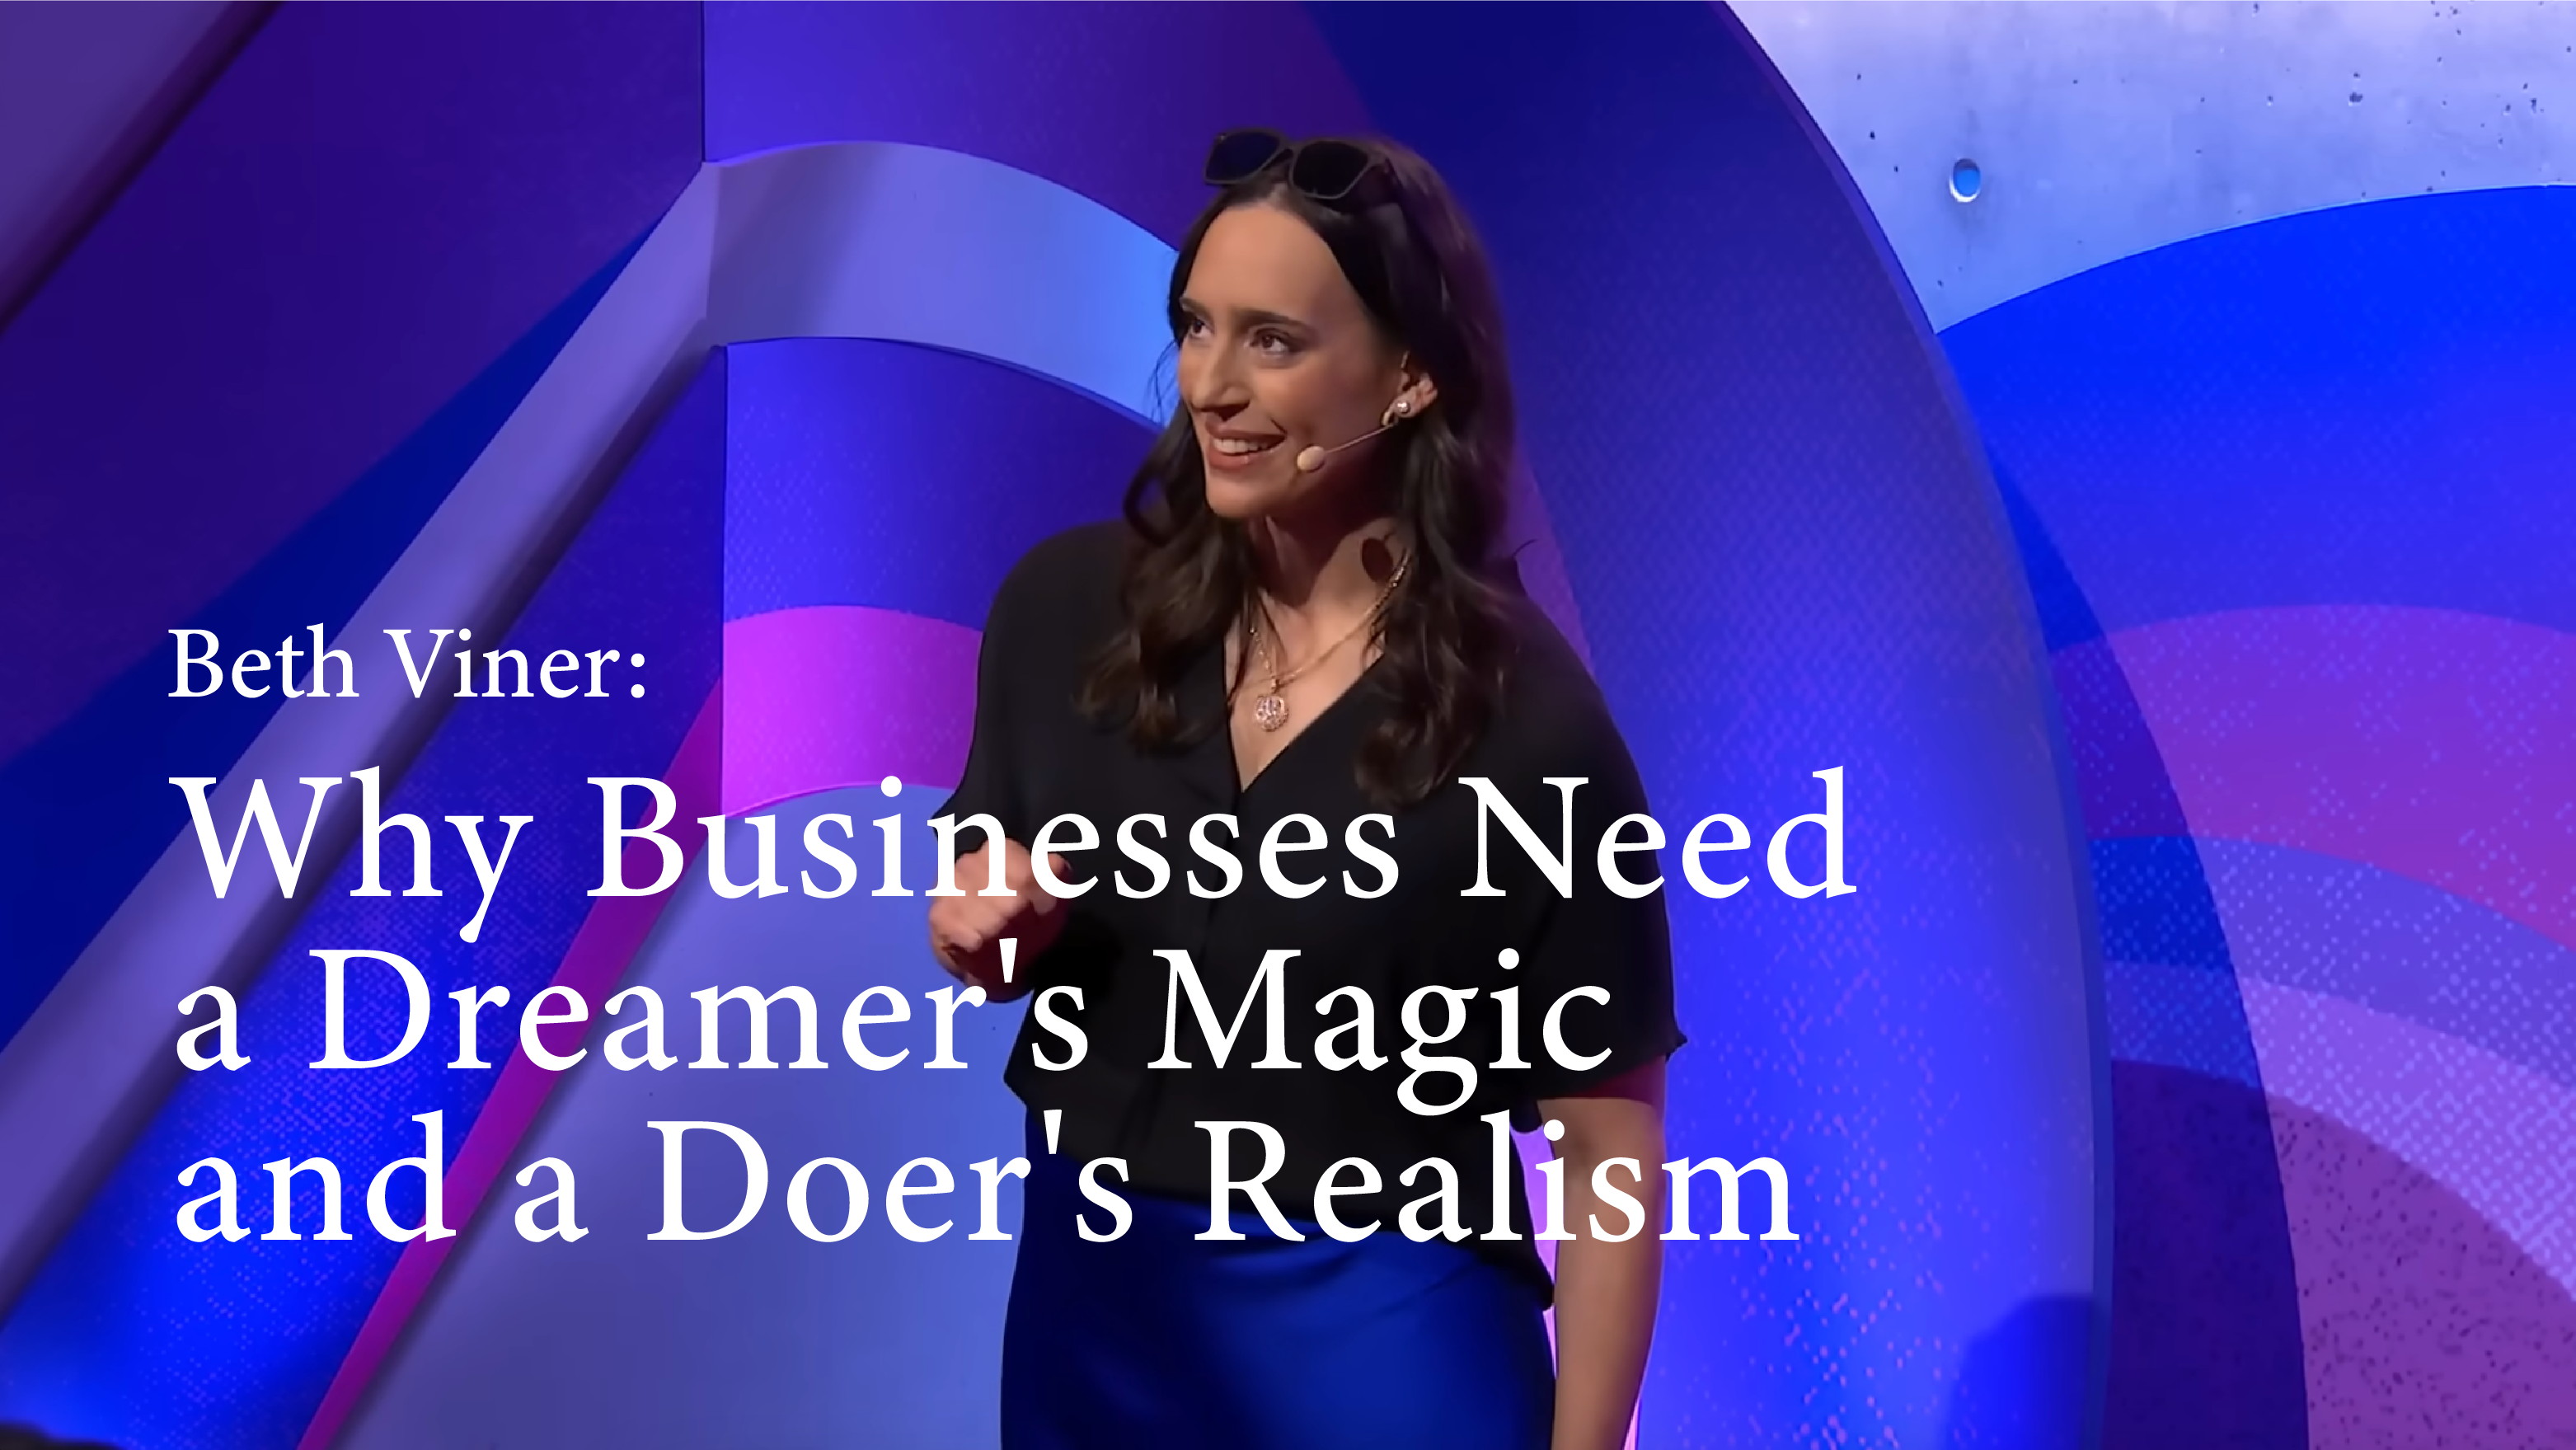 [C+] Why Businesses Need a Dreamer's Magic and a Doer's Realism [FULL]